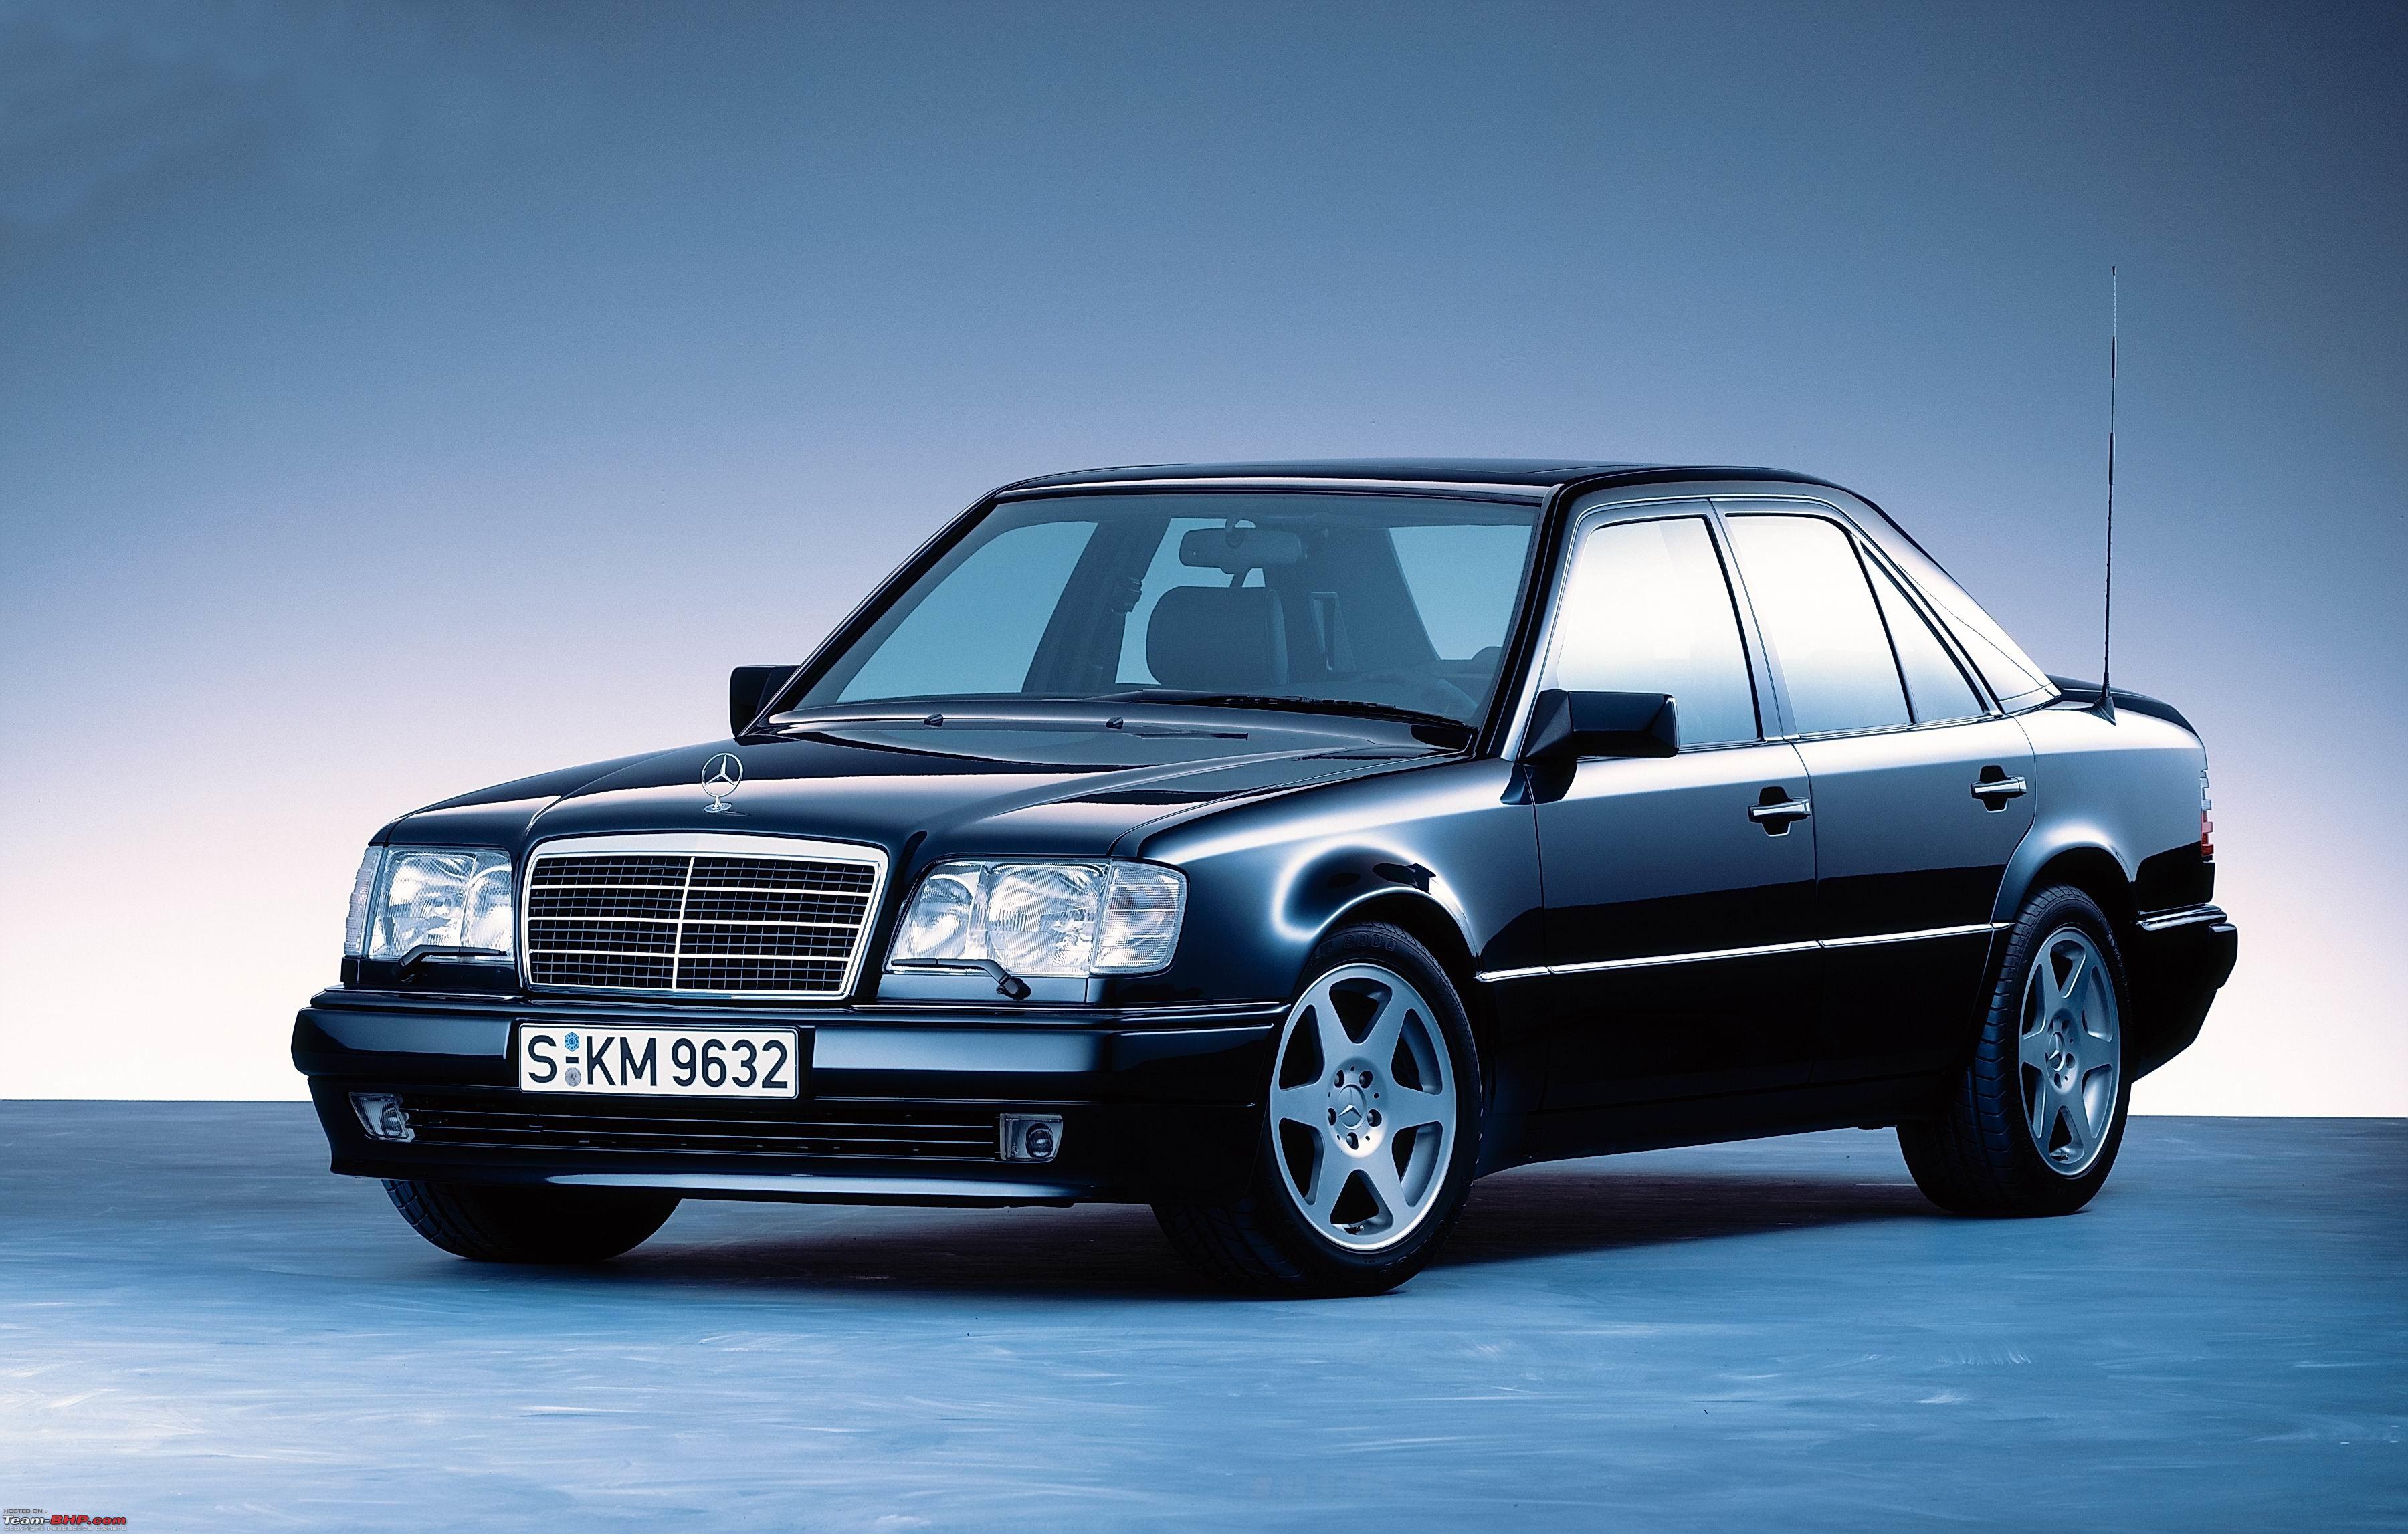 Blast from the past! Mercedes-Benz E 500 - The V8 saloon with